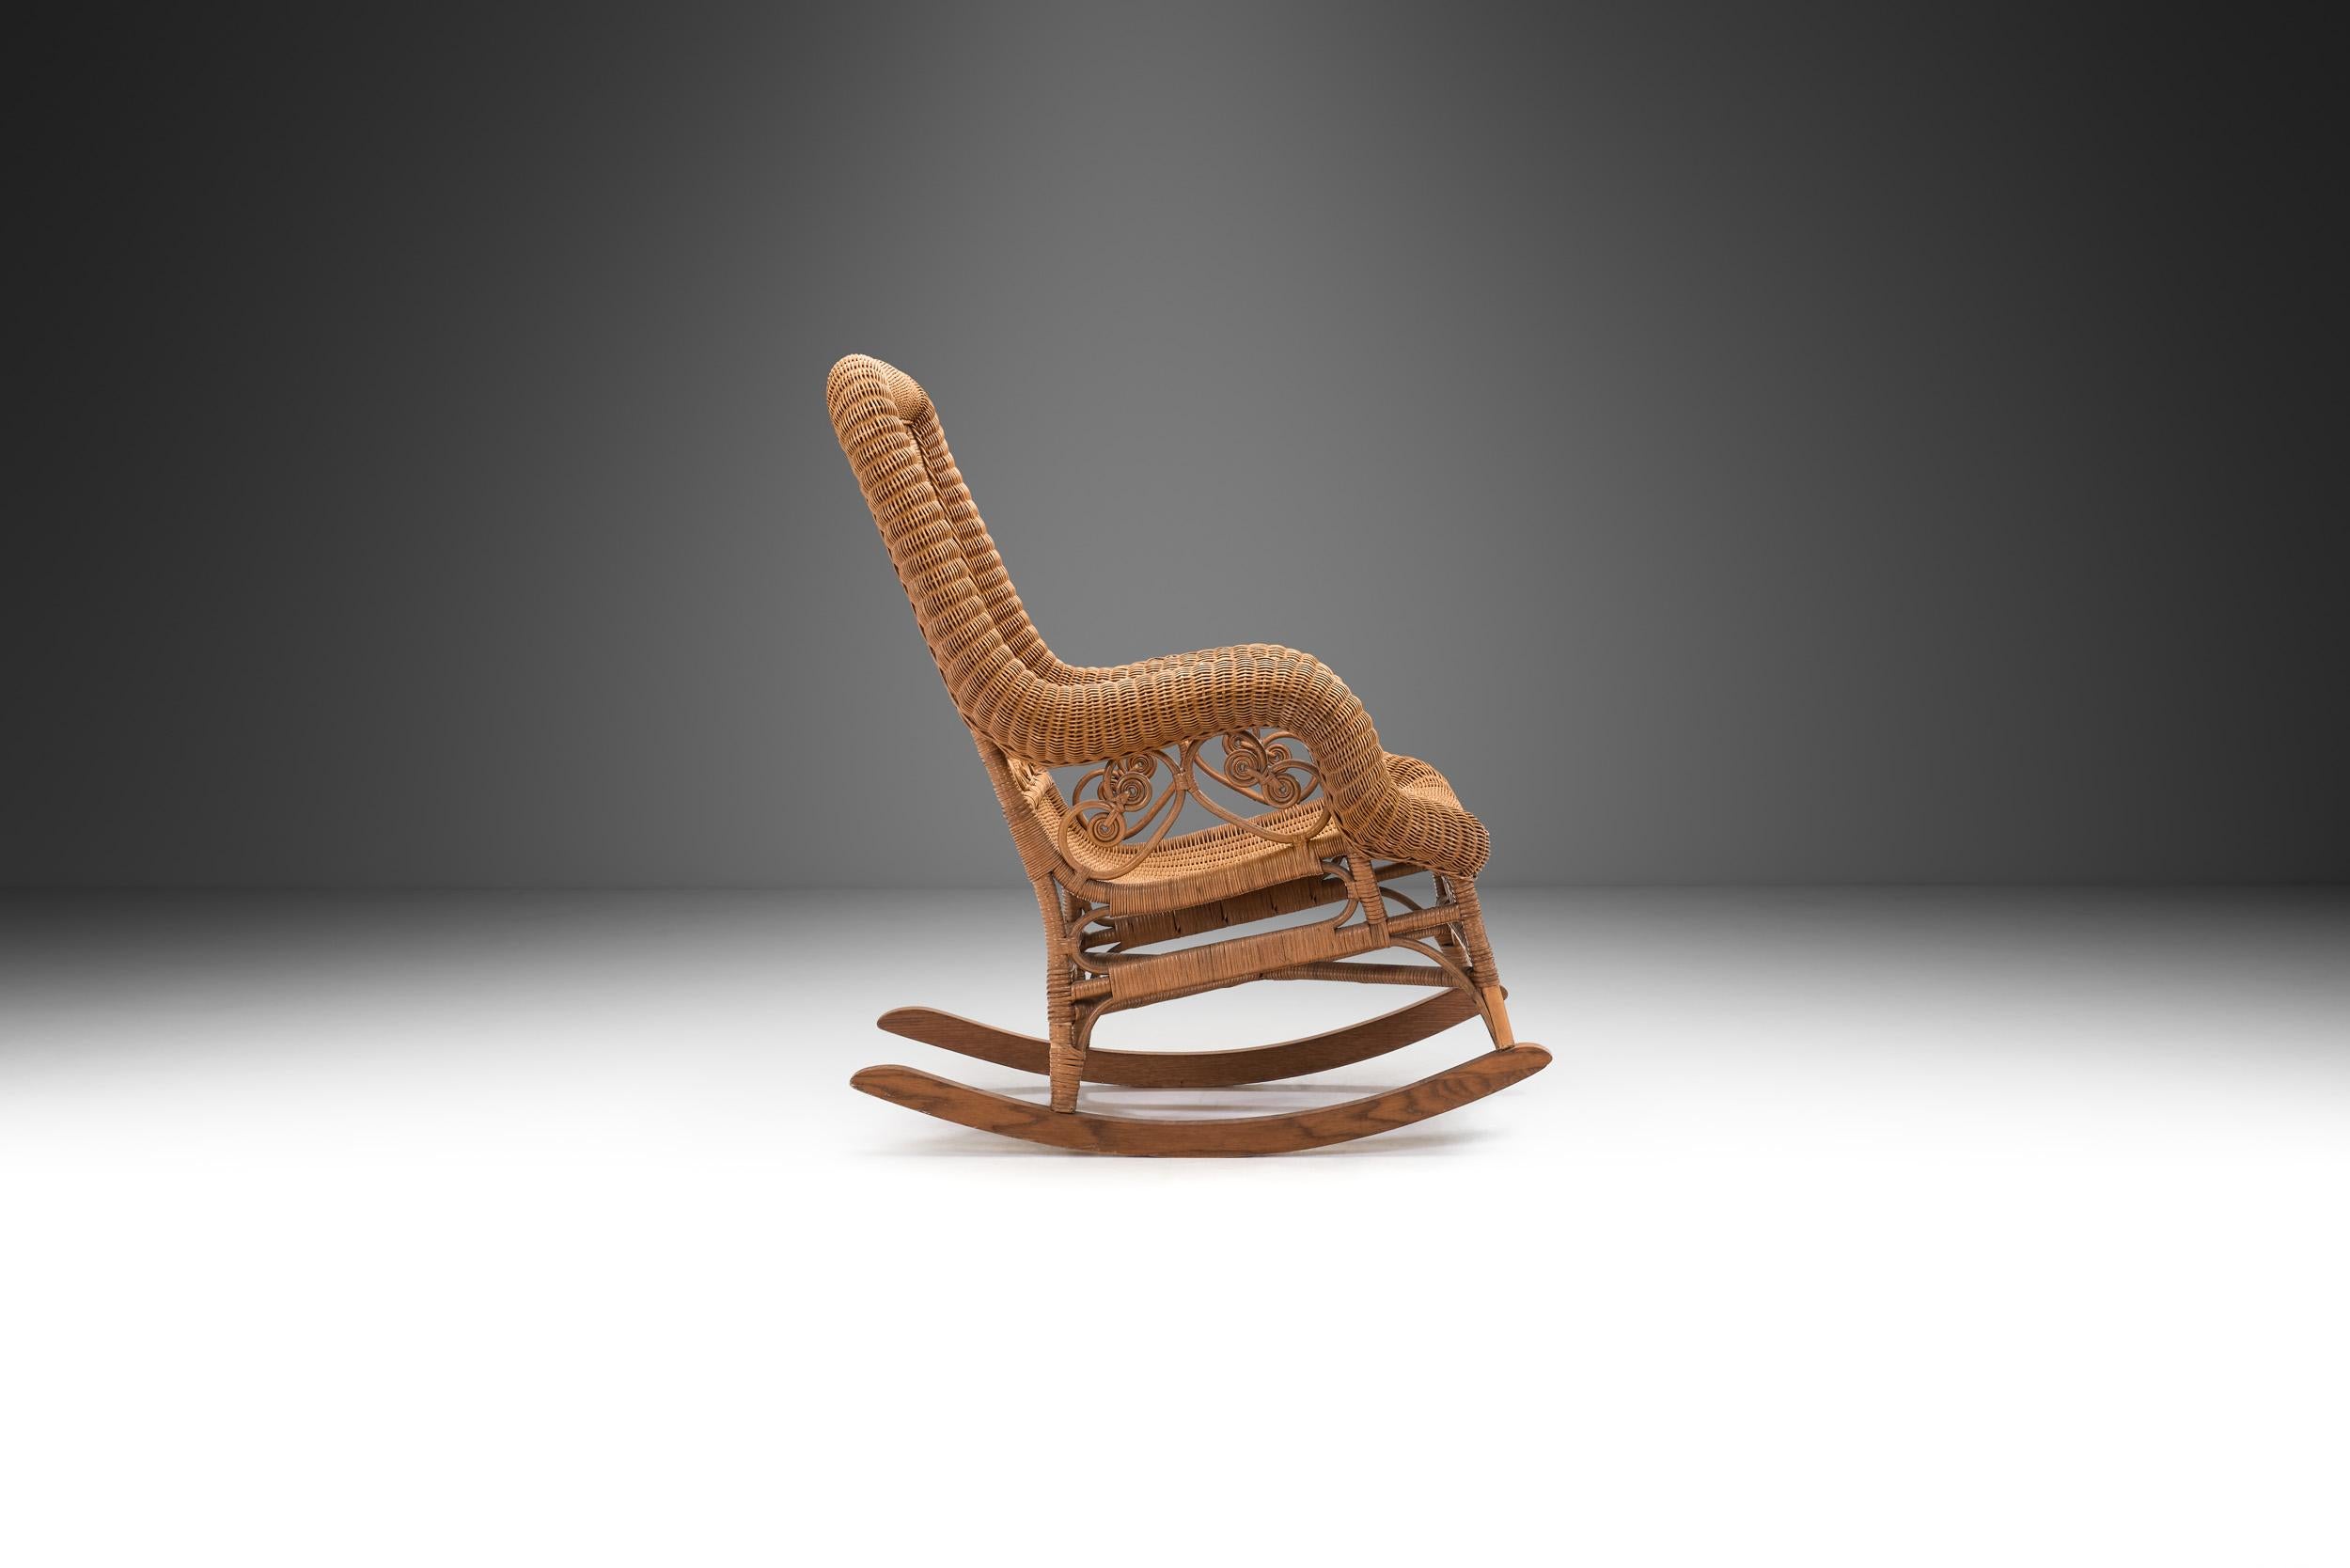 Woven Bamboo and Rattan Rocking Chair, Europe First Half of the 20th Century